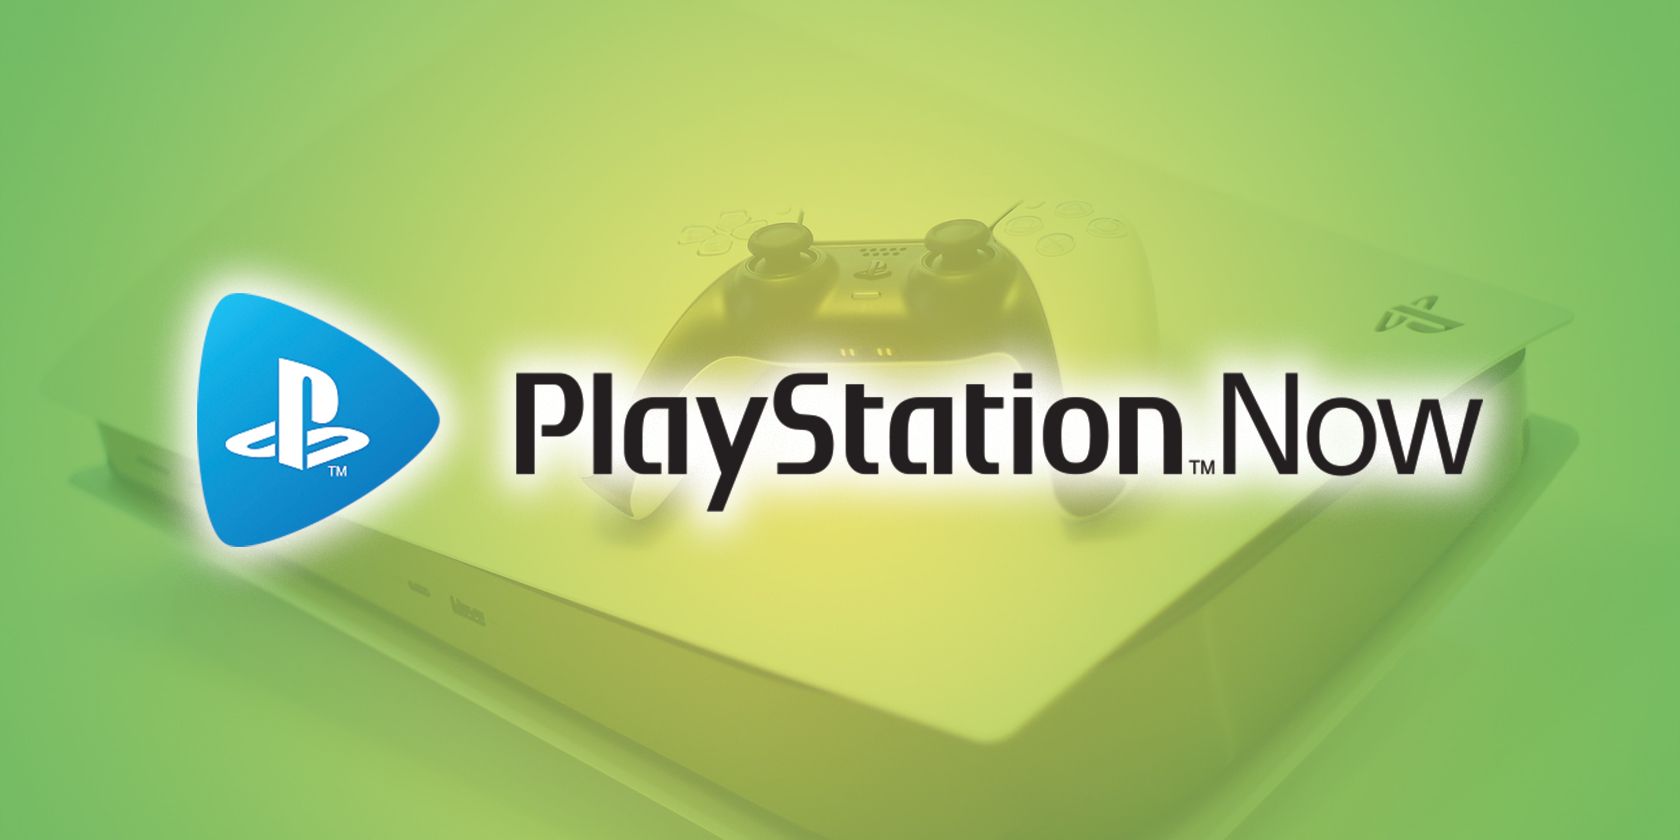 Could PlayStation Now be Netflix for gaming?